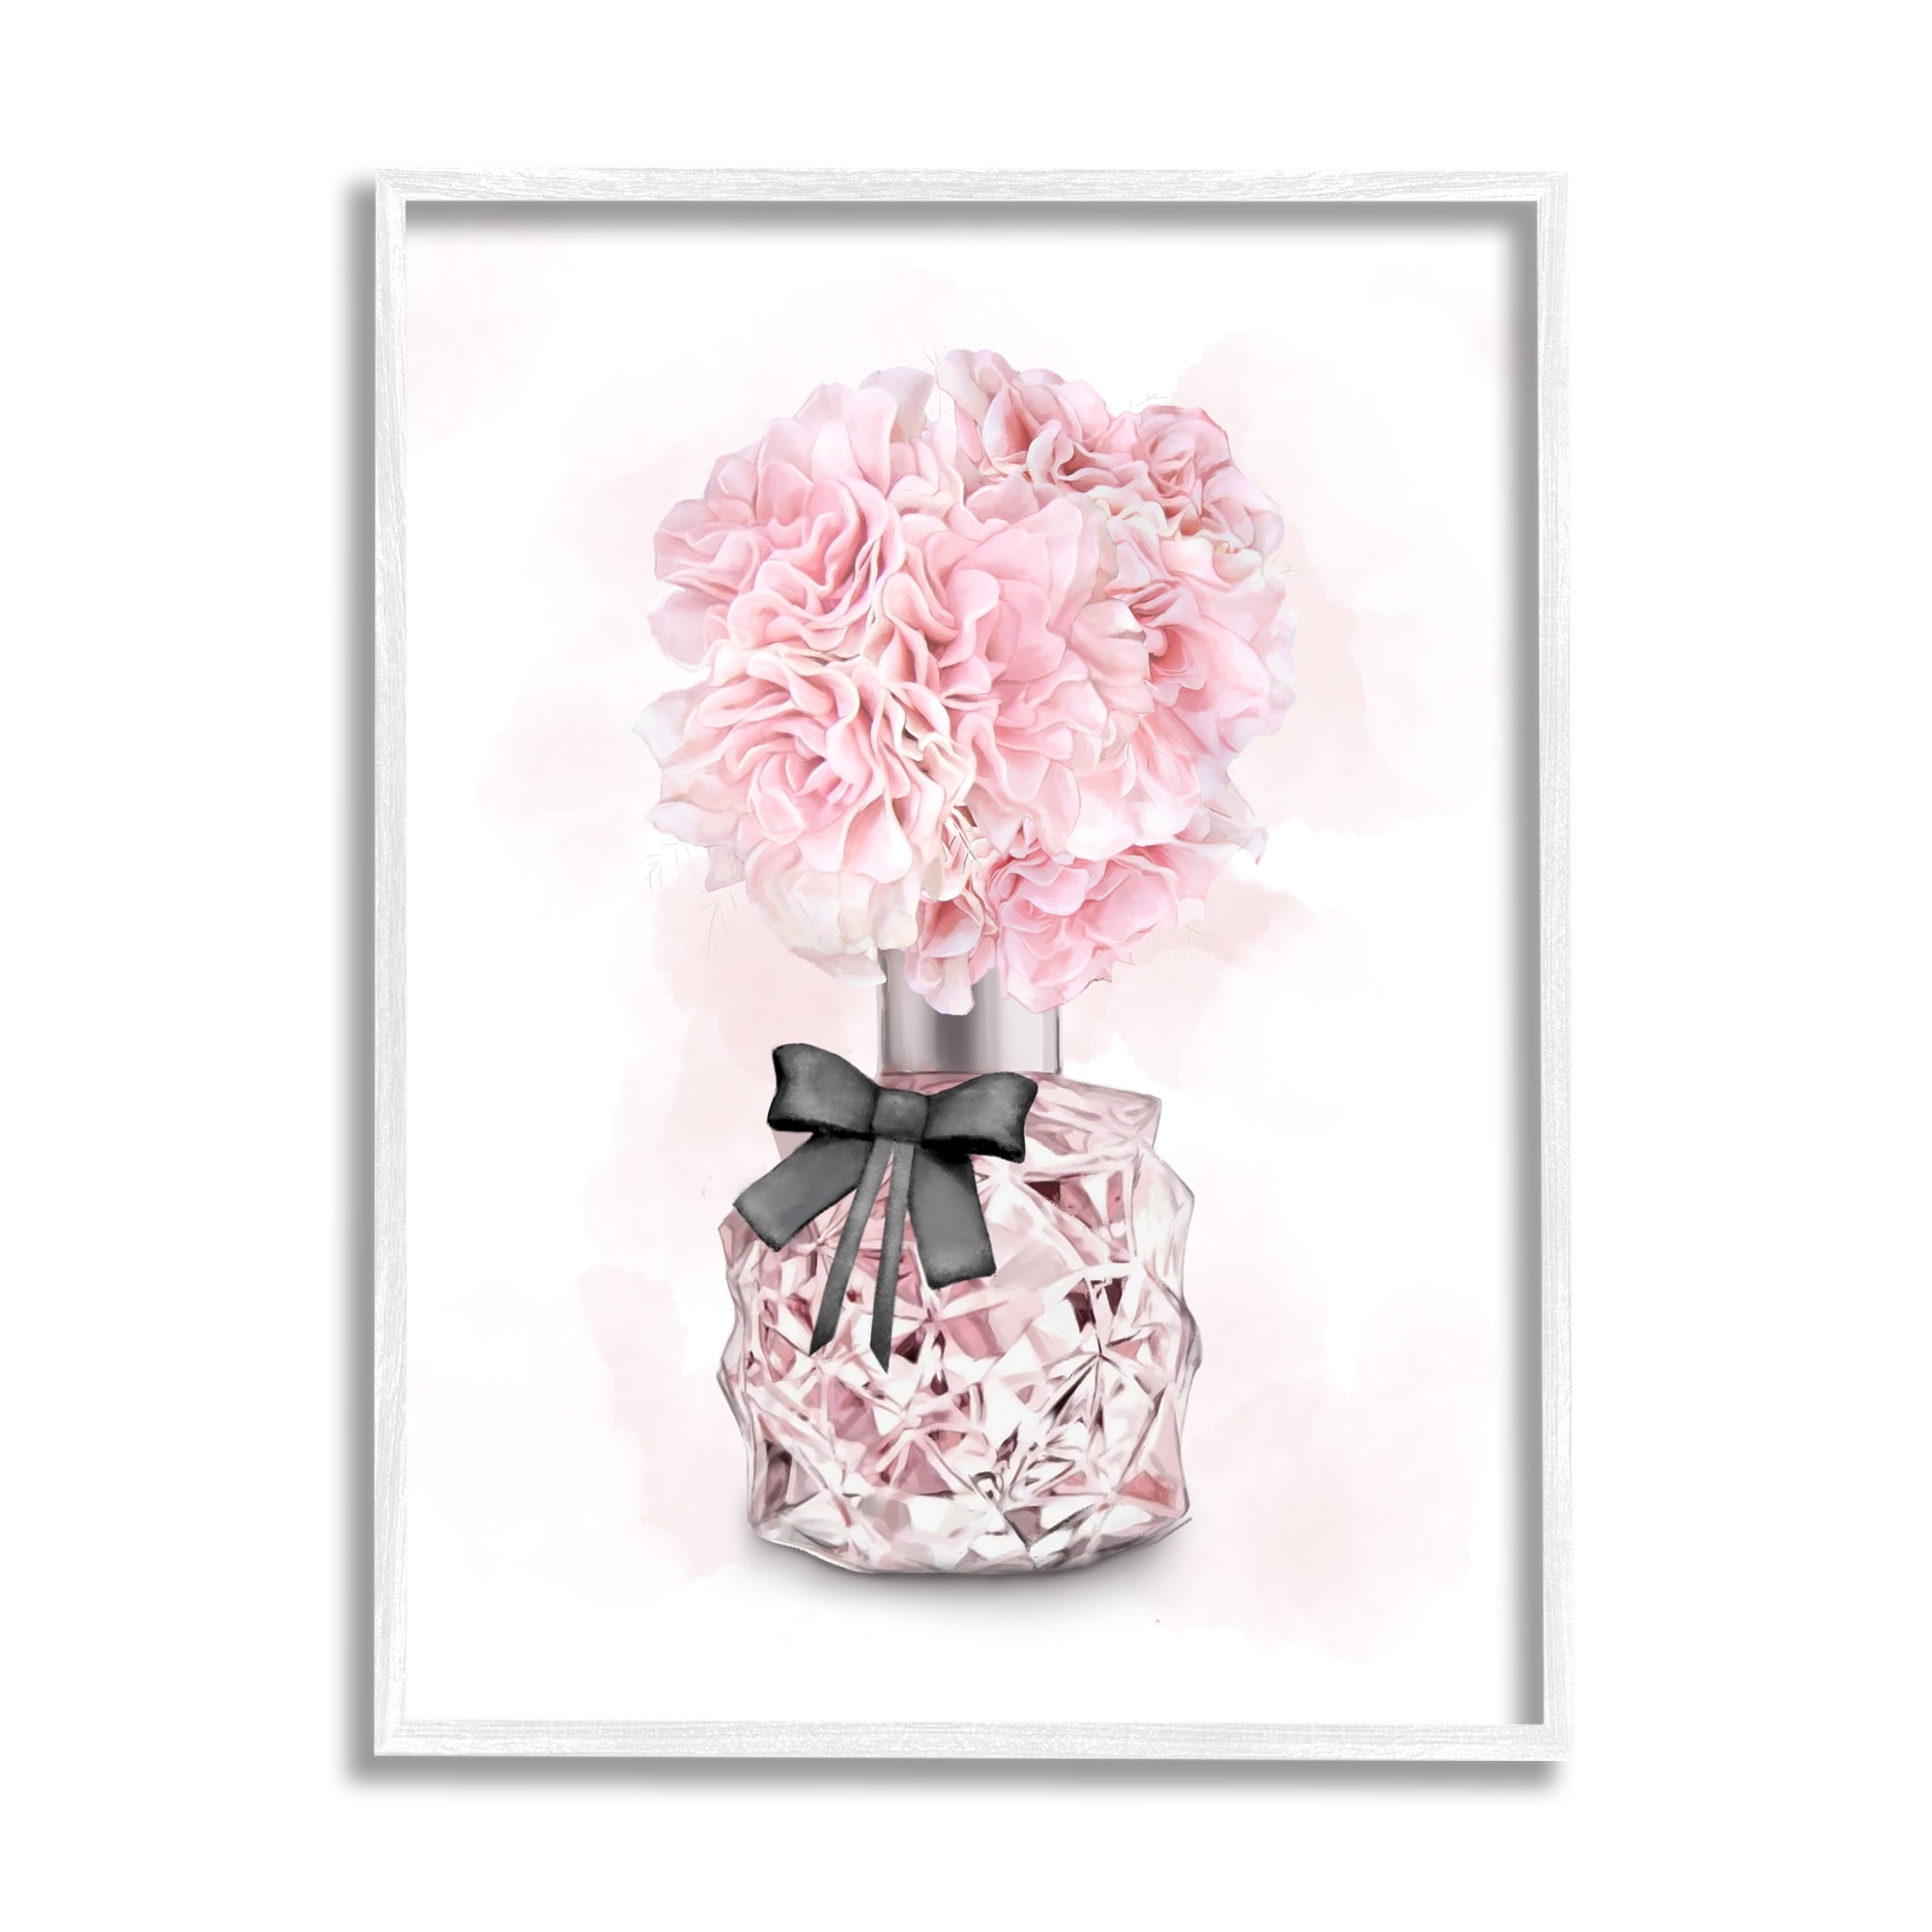 Stupell Industries Black Perfume Pink Flowers Glam Fashion Watercolor Design Wall Plaque by Amanda Greenwood, Size: 13 x 19